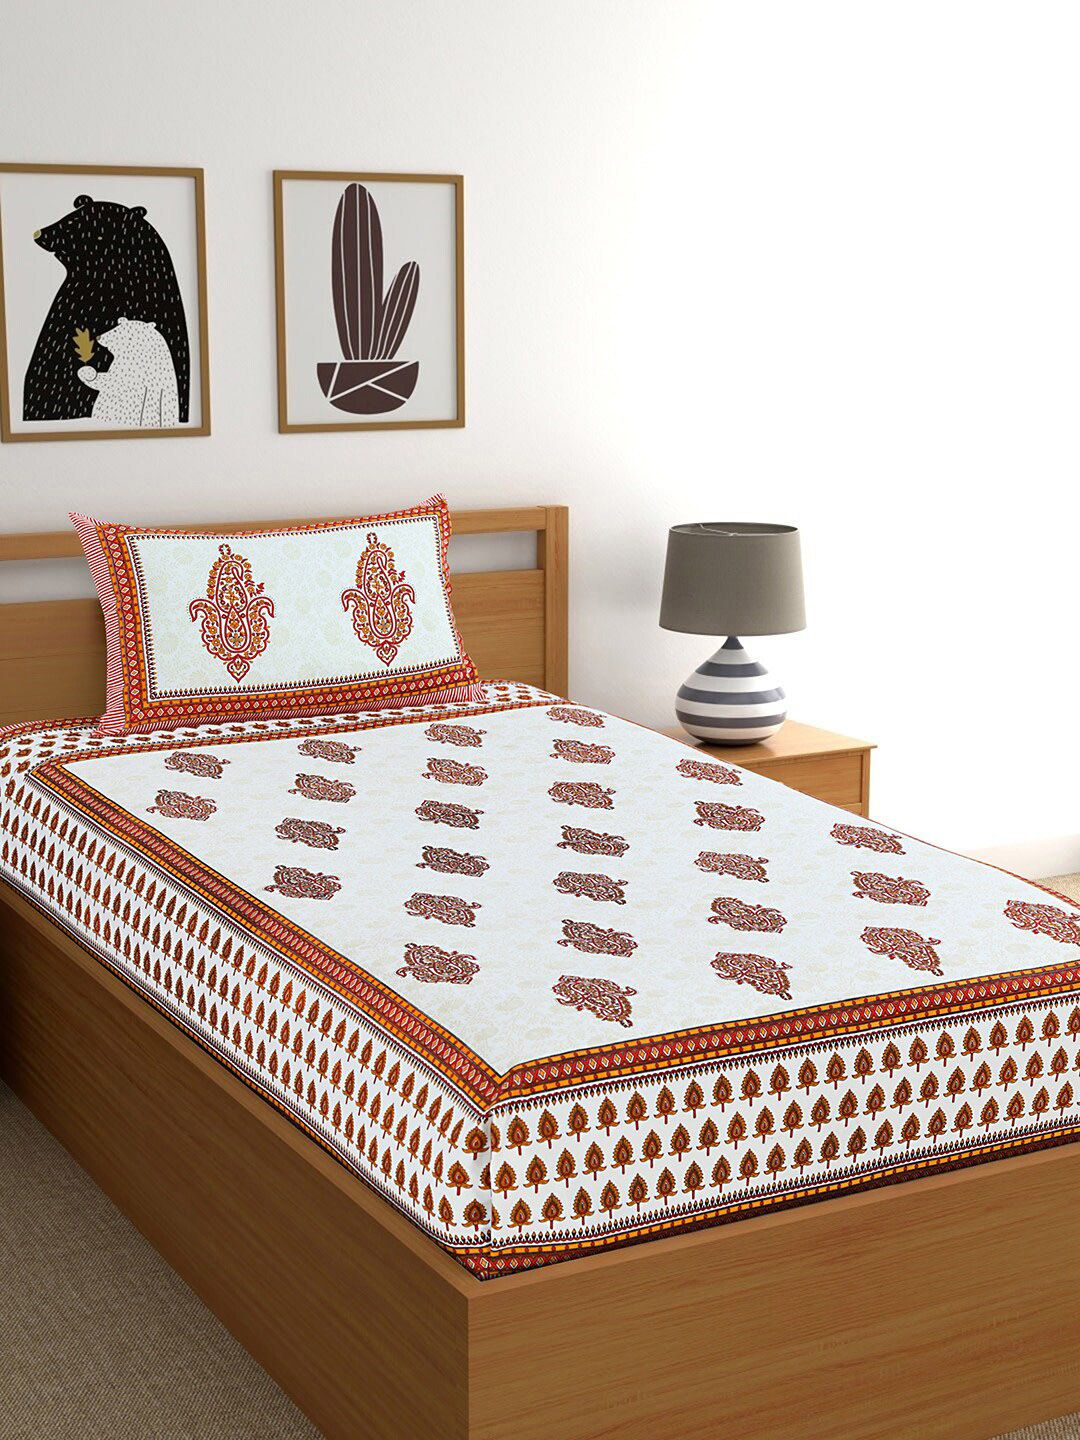 Salona Bichona White & Red Ethnic Motifs Printed 120 TC Cotton Single Bedsheet With 1 Pillow Cover Price in India